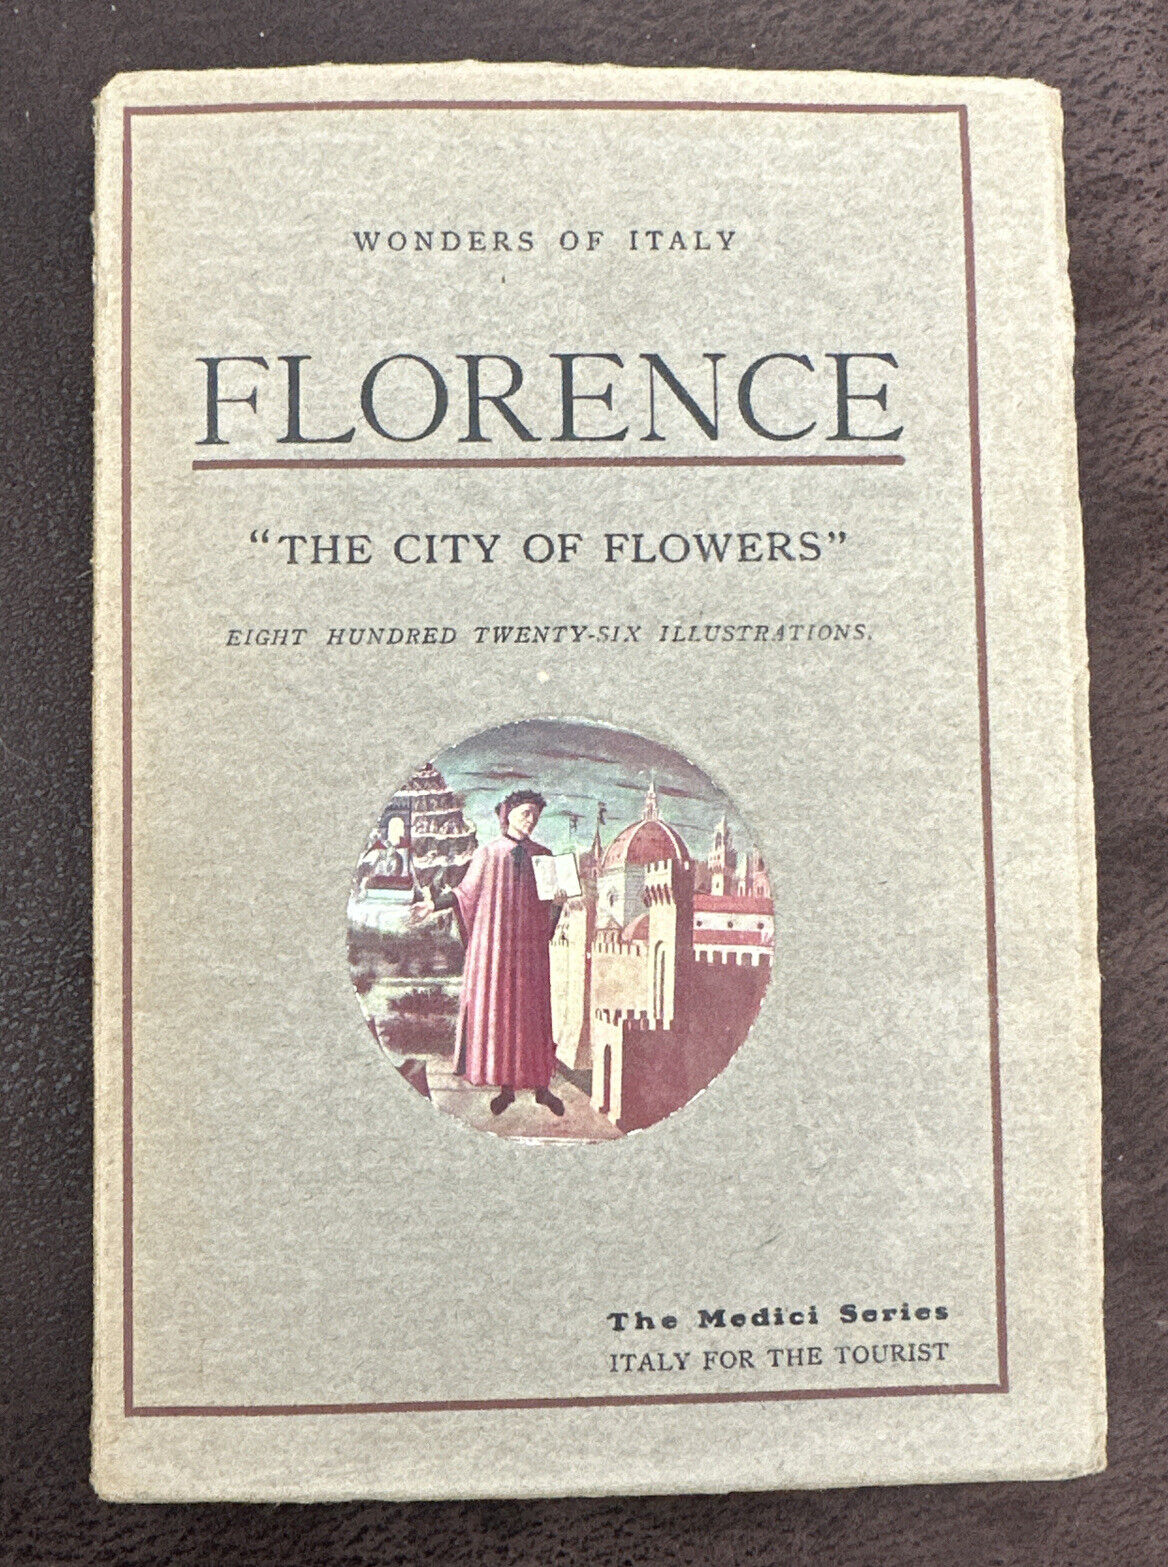 FLORENCE THE CITY OF FLOWERS - 1931 - The Medici Series No. 3 - Vintage